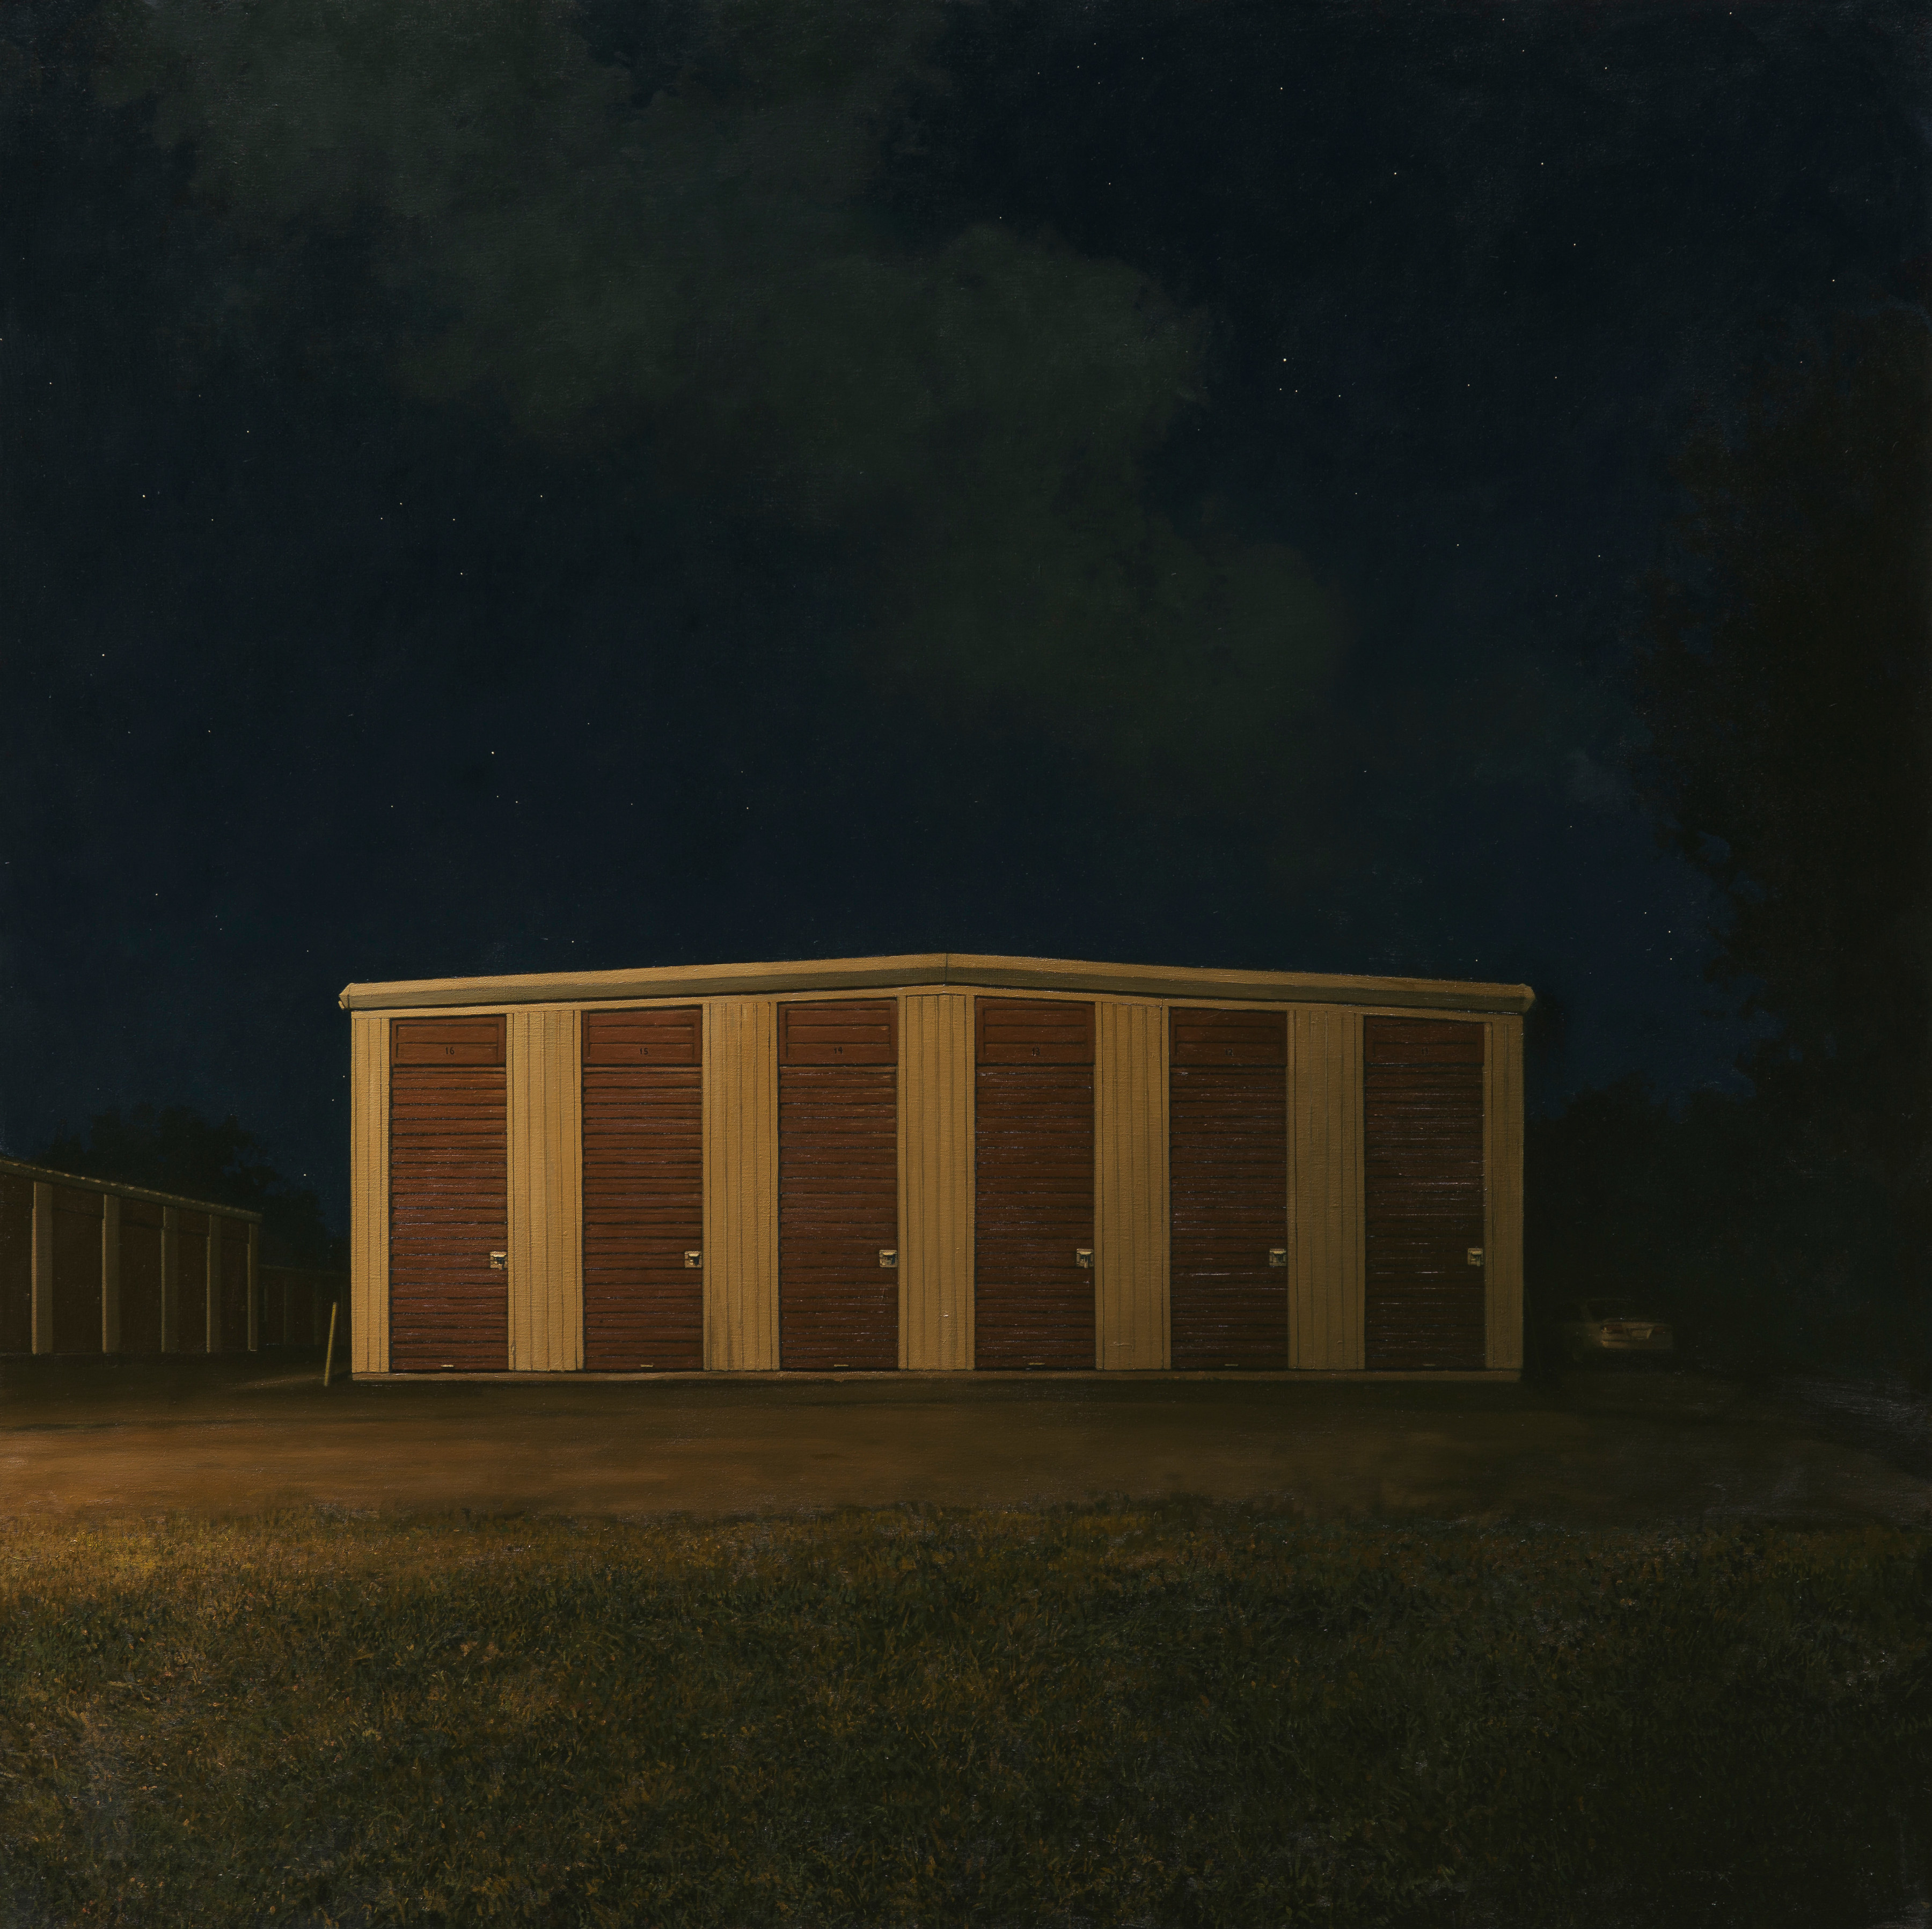 linden frederick, Self-Storage, 2014, oil on linen, 65 x 65 inches